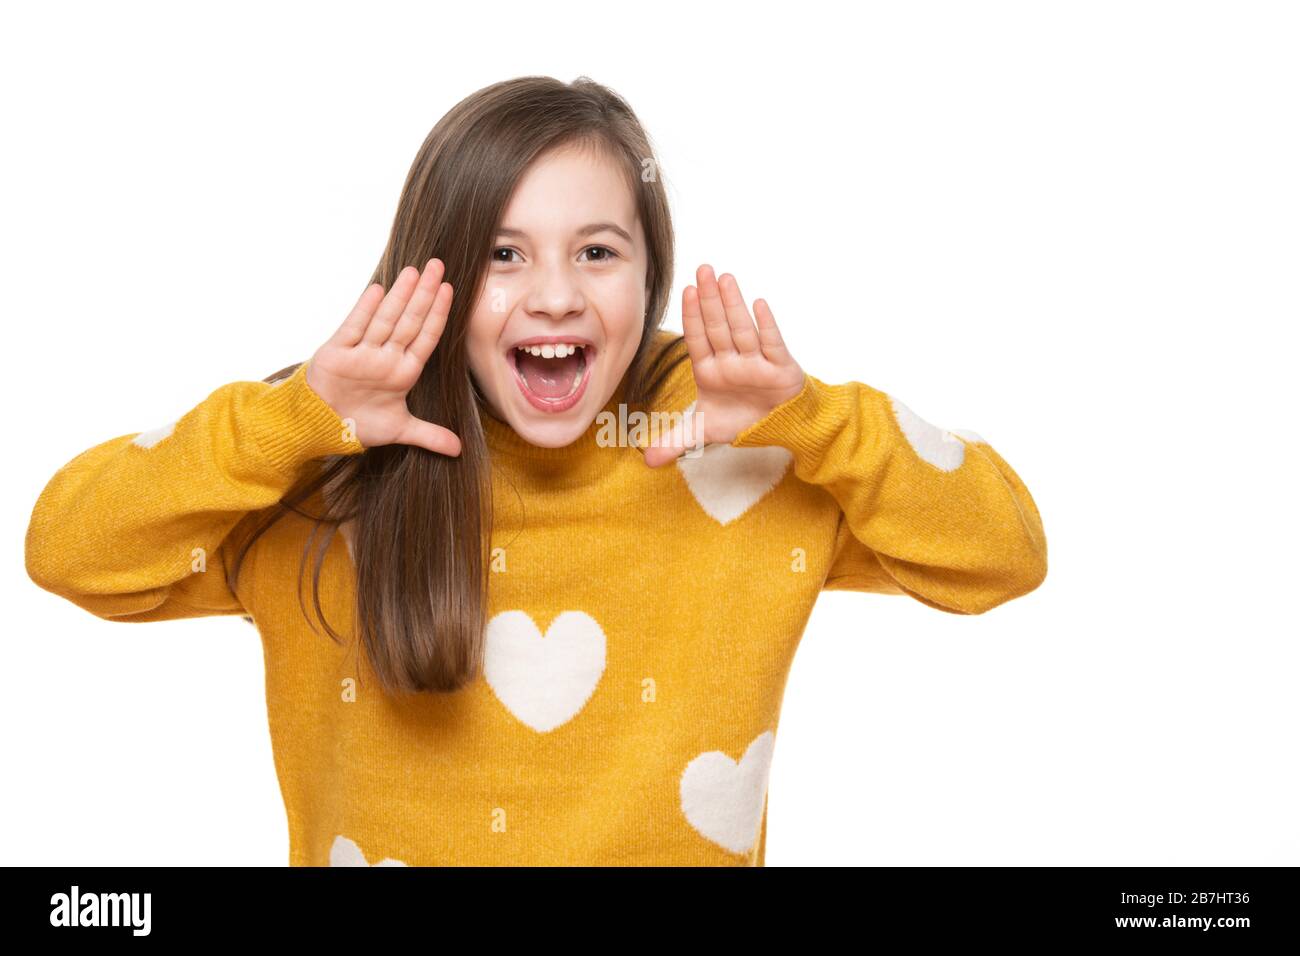 Studio portrait of an adorable young girl screaming with excitement, isolated on white backgroud. Human emotions and facial expressions concept. Stock Photo